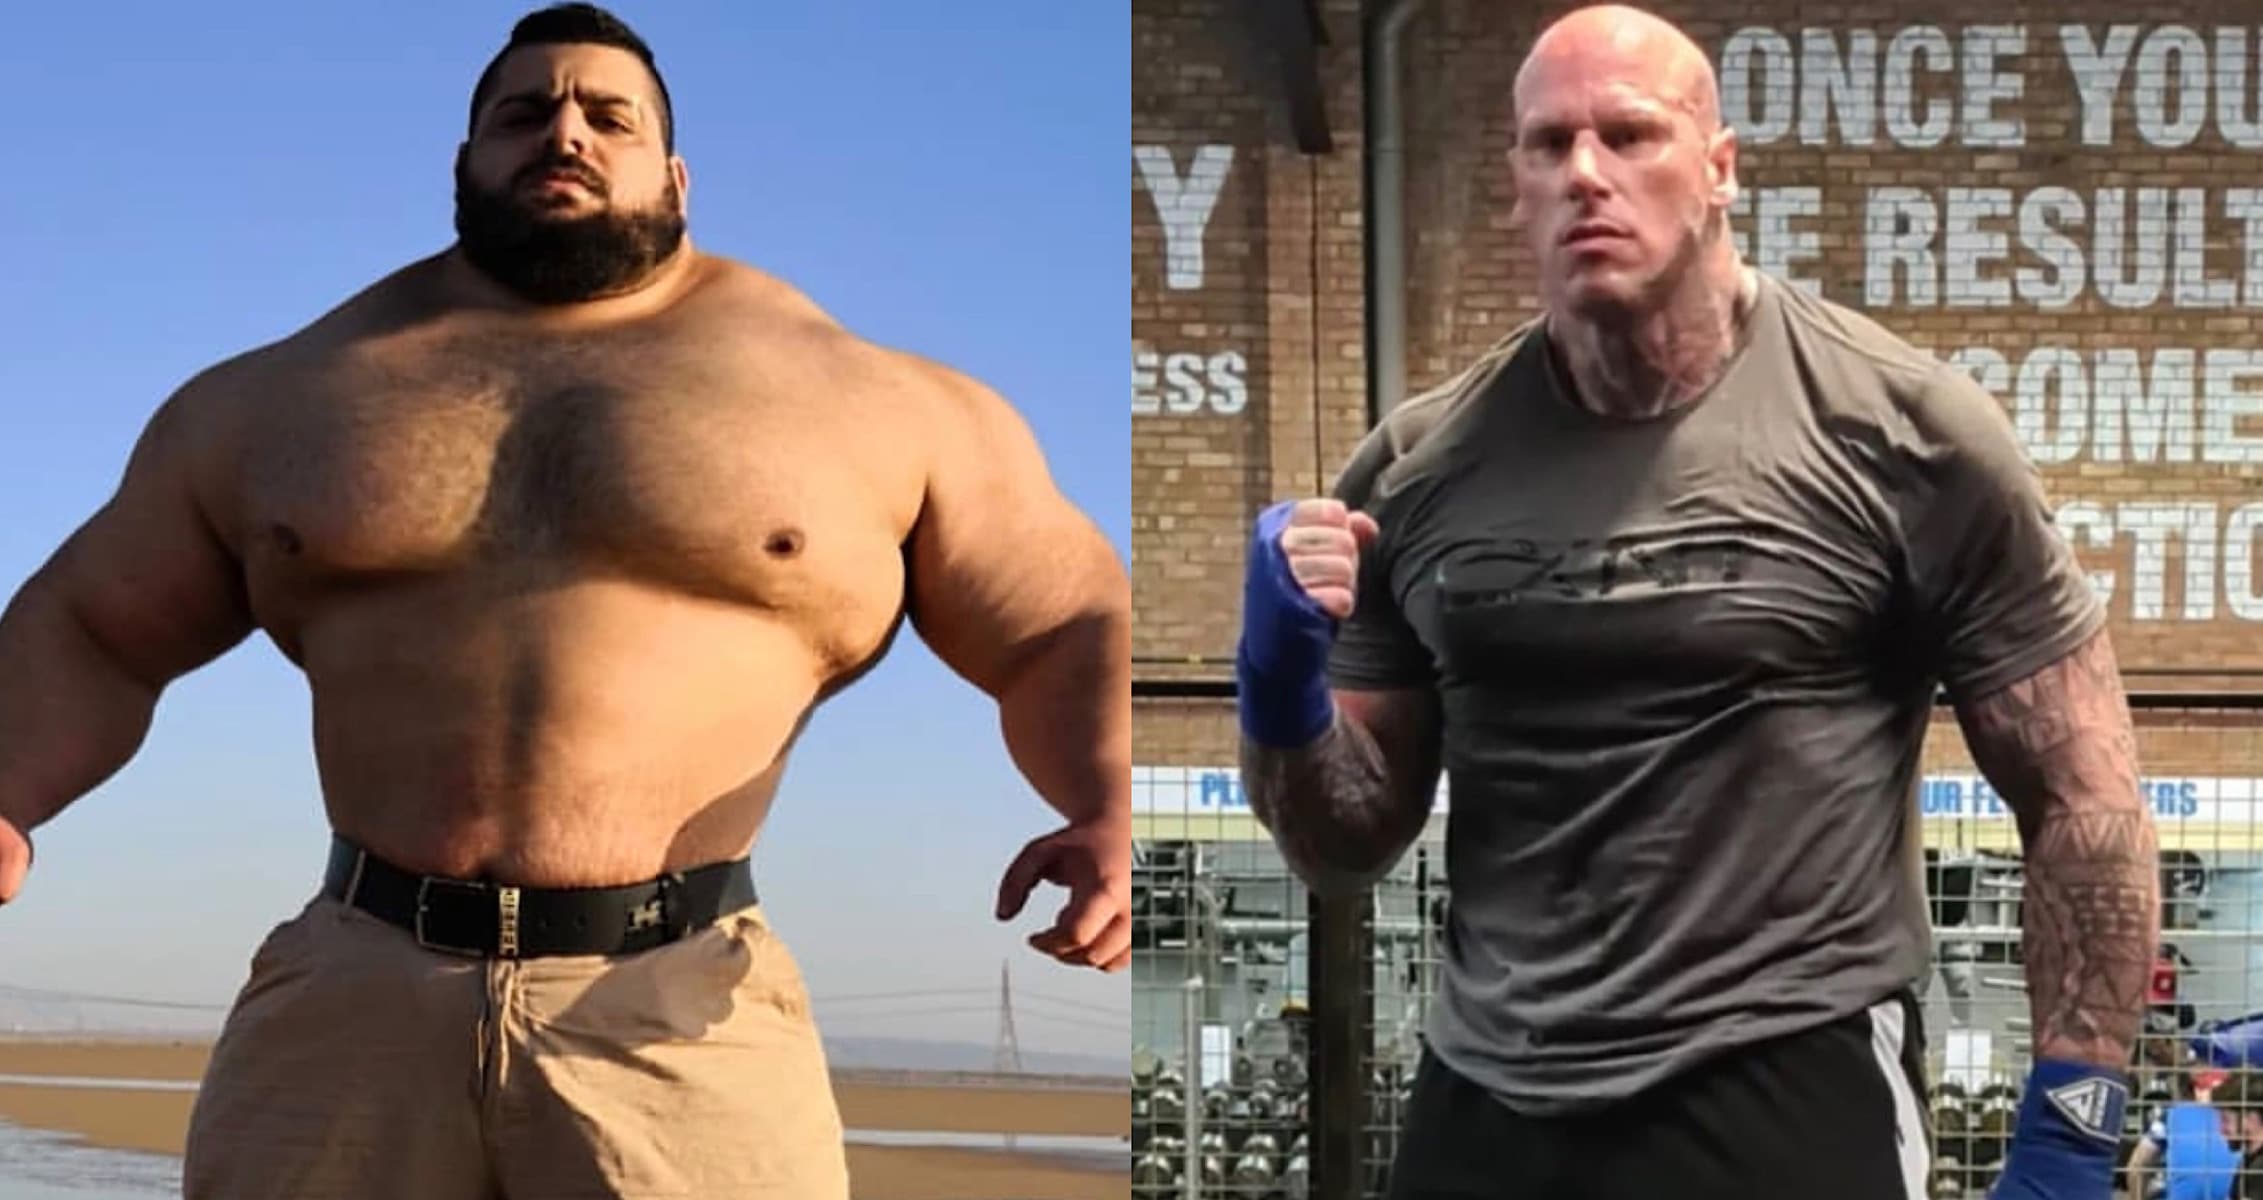 Iranian Hulk Claims Martyn Ford Pulled Out of Fight: “For Me The Fight is Still On”